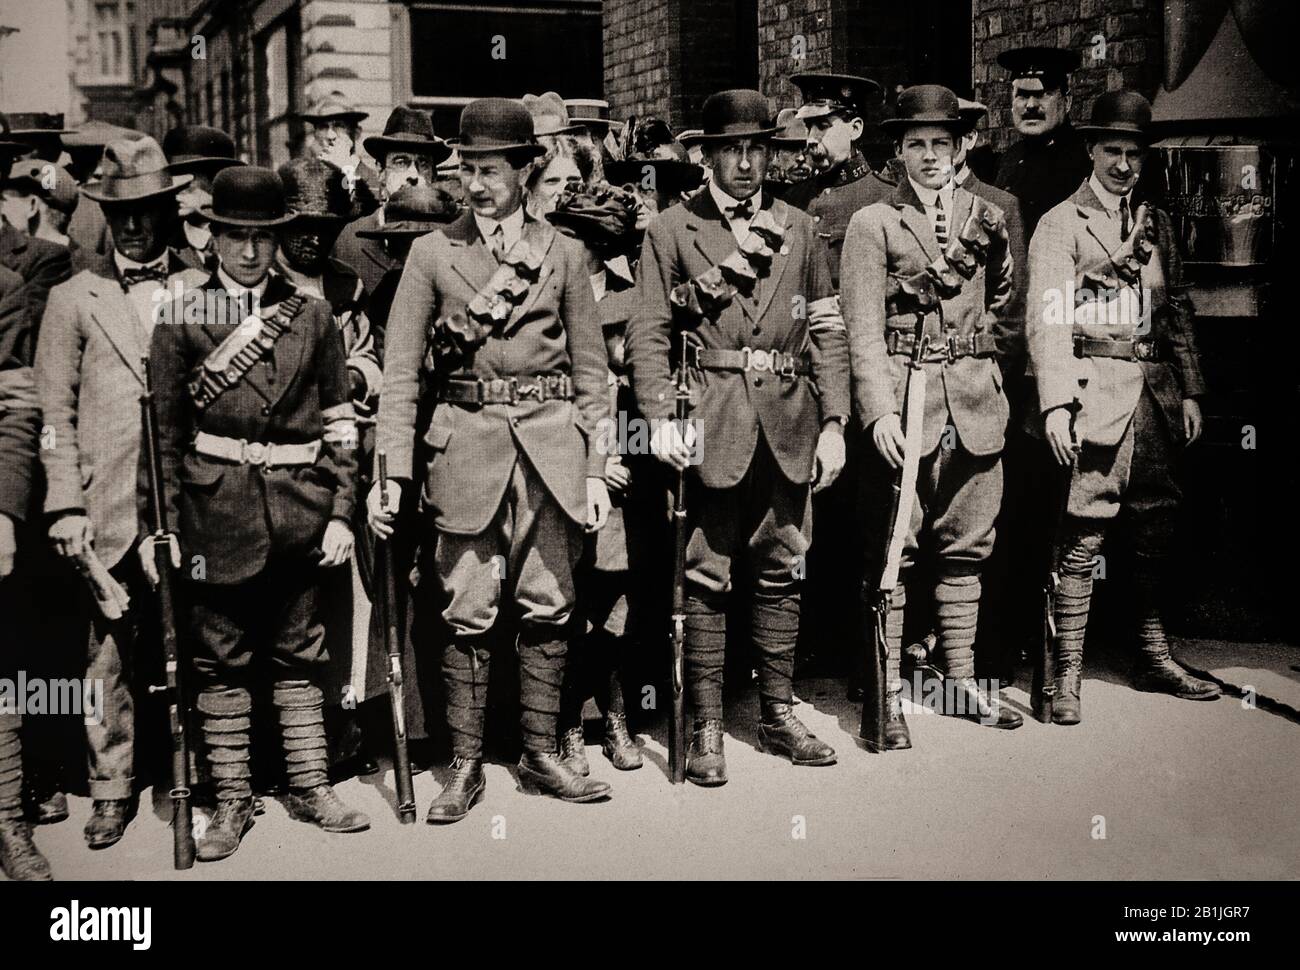 Members of the Ulster Volunteer Force, with German rifles smuggled into Ireland in 1914.  A Unionist militia was founded in 1912 to block Home Rule for Ireland, which was then part of the United Kingdom. The Ulster Volunteers were based in the northern province of Ulster, where they eared being governed by a Catholic-majority parliament in Dublin and losing their local governance and strong links with Great Britain. In 1913, the militias were organised into the Ulster Volunteer Force (UVF) and vowed to resist any attempts by the British Government to impose Home Rule on Ulster. Stock Photo